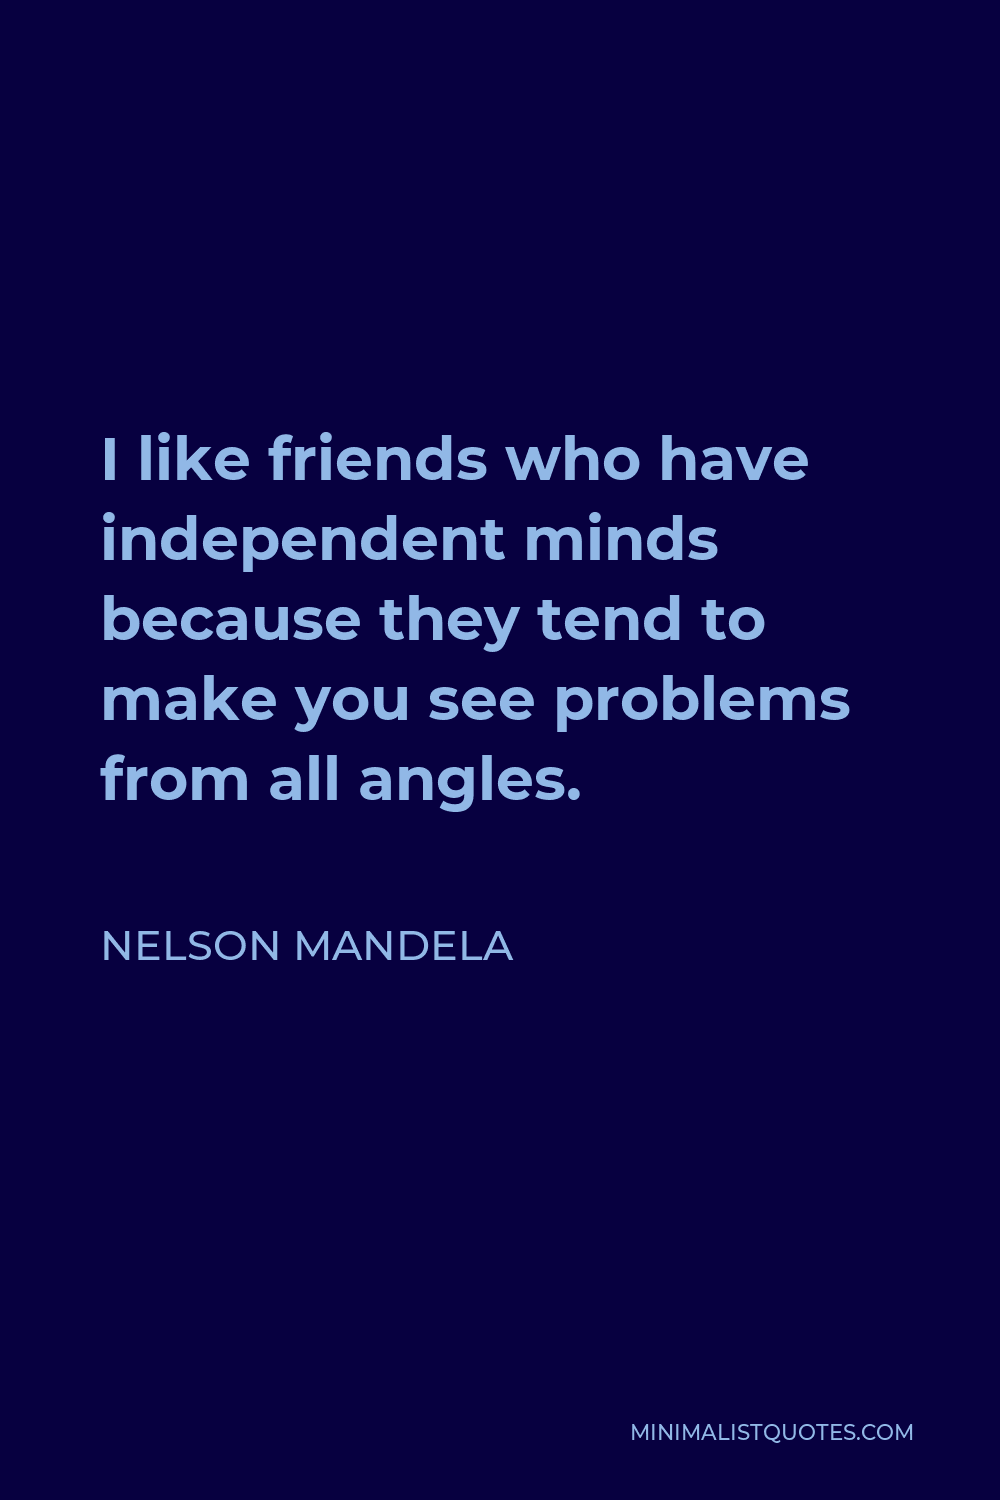 Nelson Mandela Quote - I like friends who have independent minds because they tend to make you see problems from all angles.